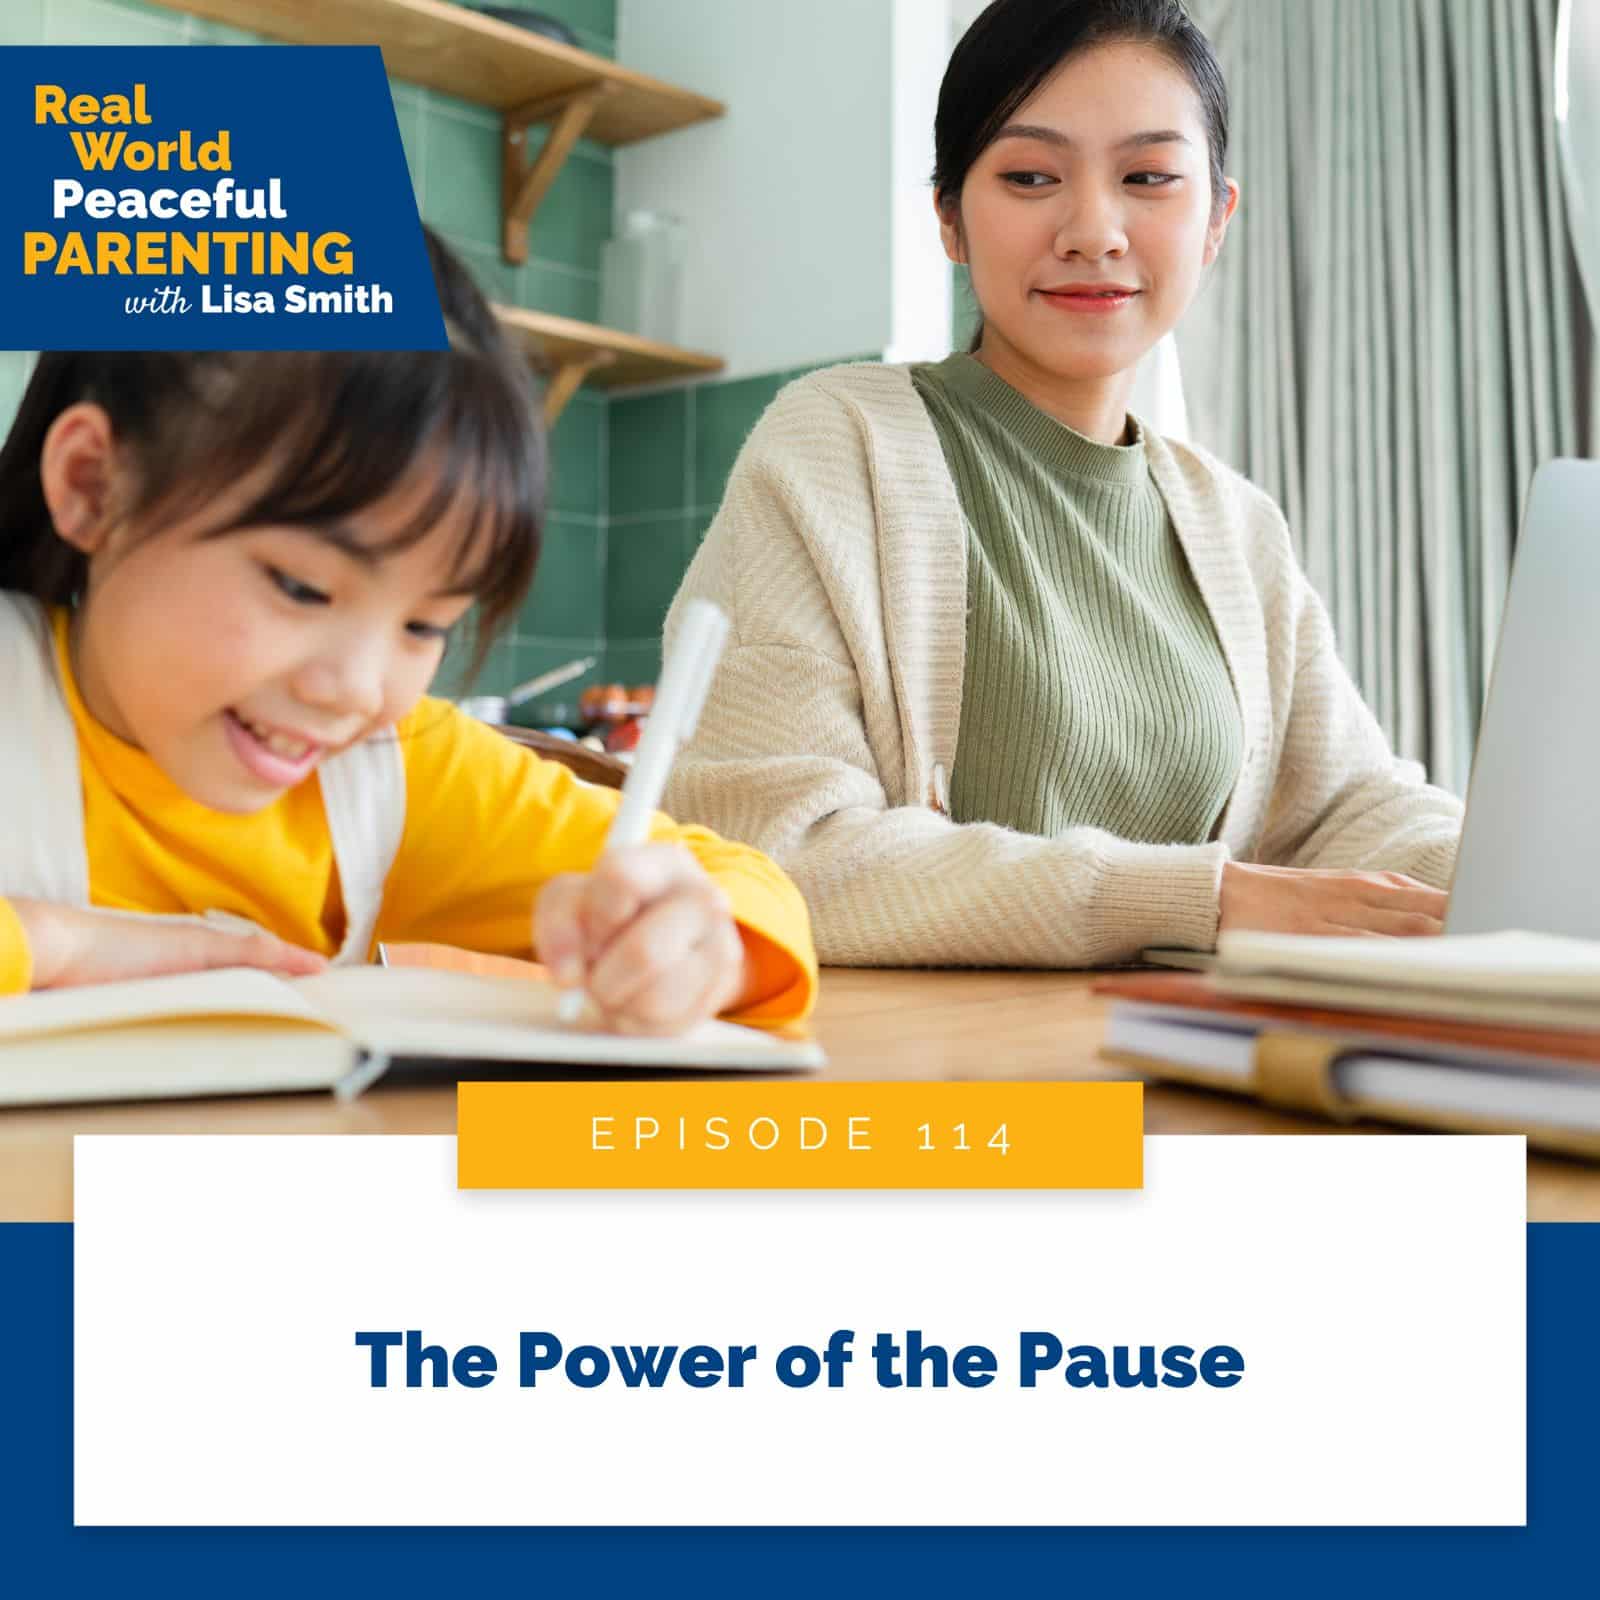 Real World Peaceful Parenting Lisa Smith | The Power of the Pause